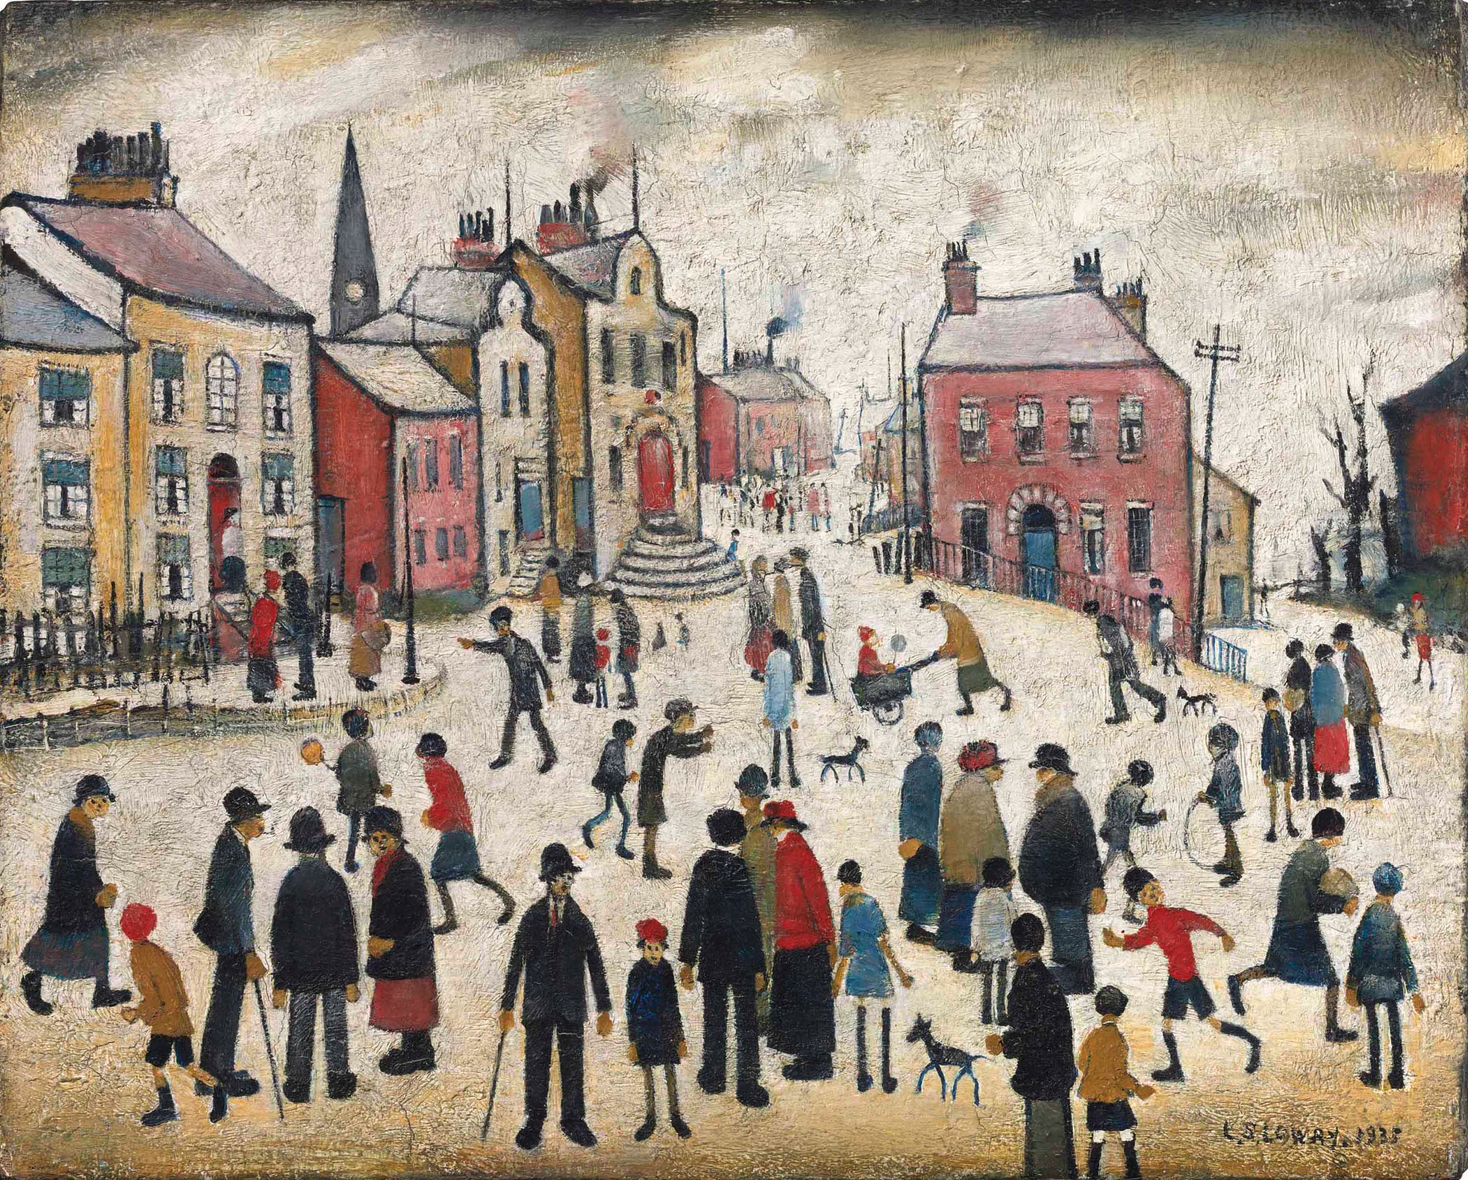 People Standing About (1935) by Laurence Stephen Lowry (1887 - 1976), English artist.